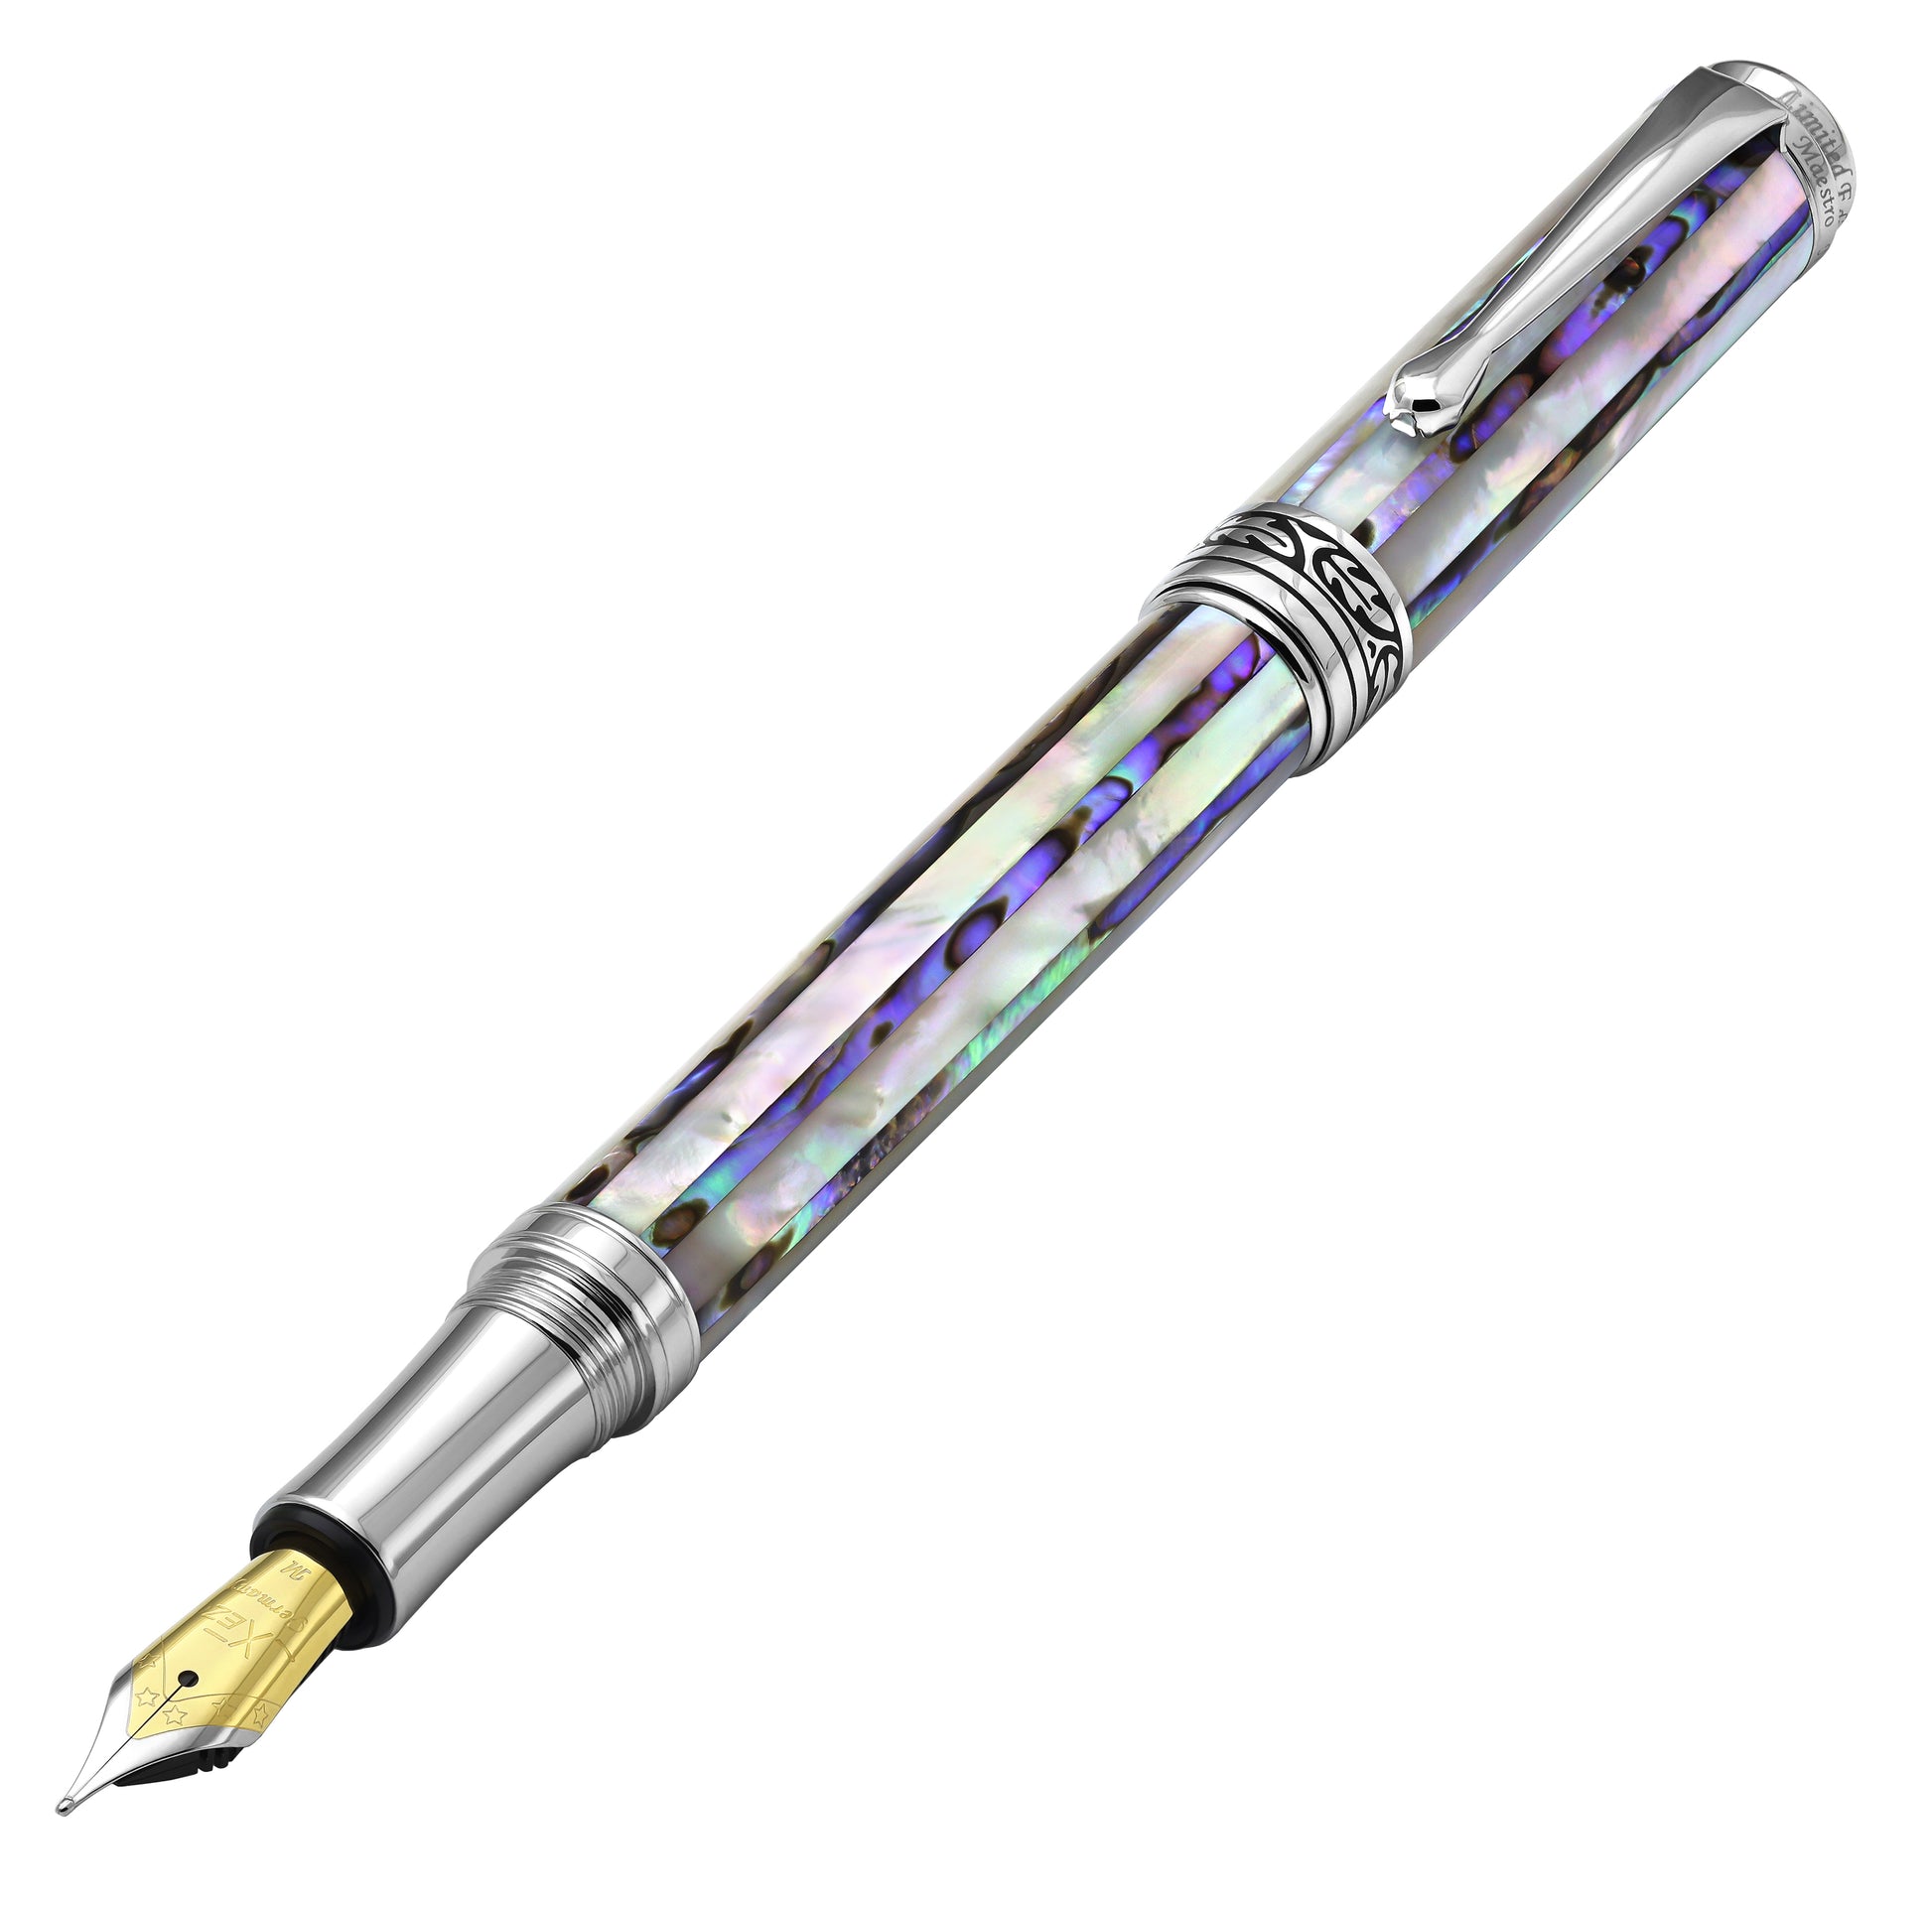 Maestro Jubilee MOP Abalone uncapped Fountain Pen at Angle